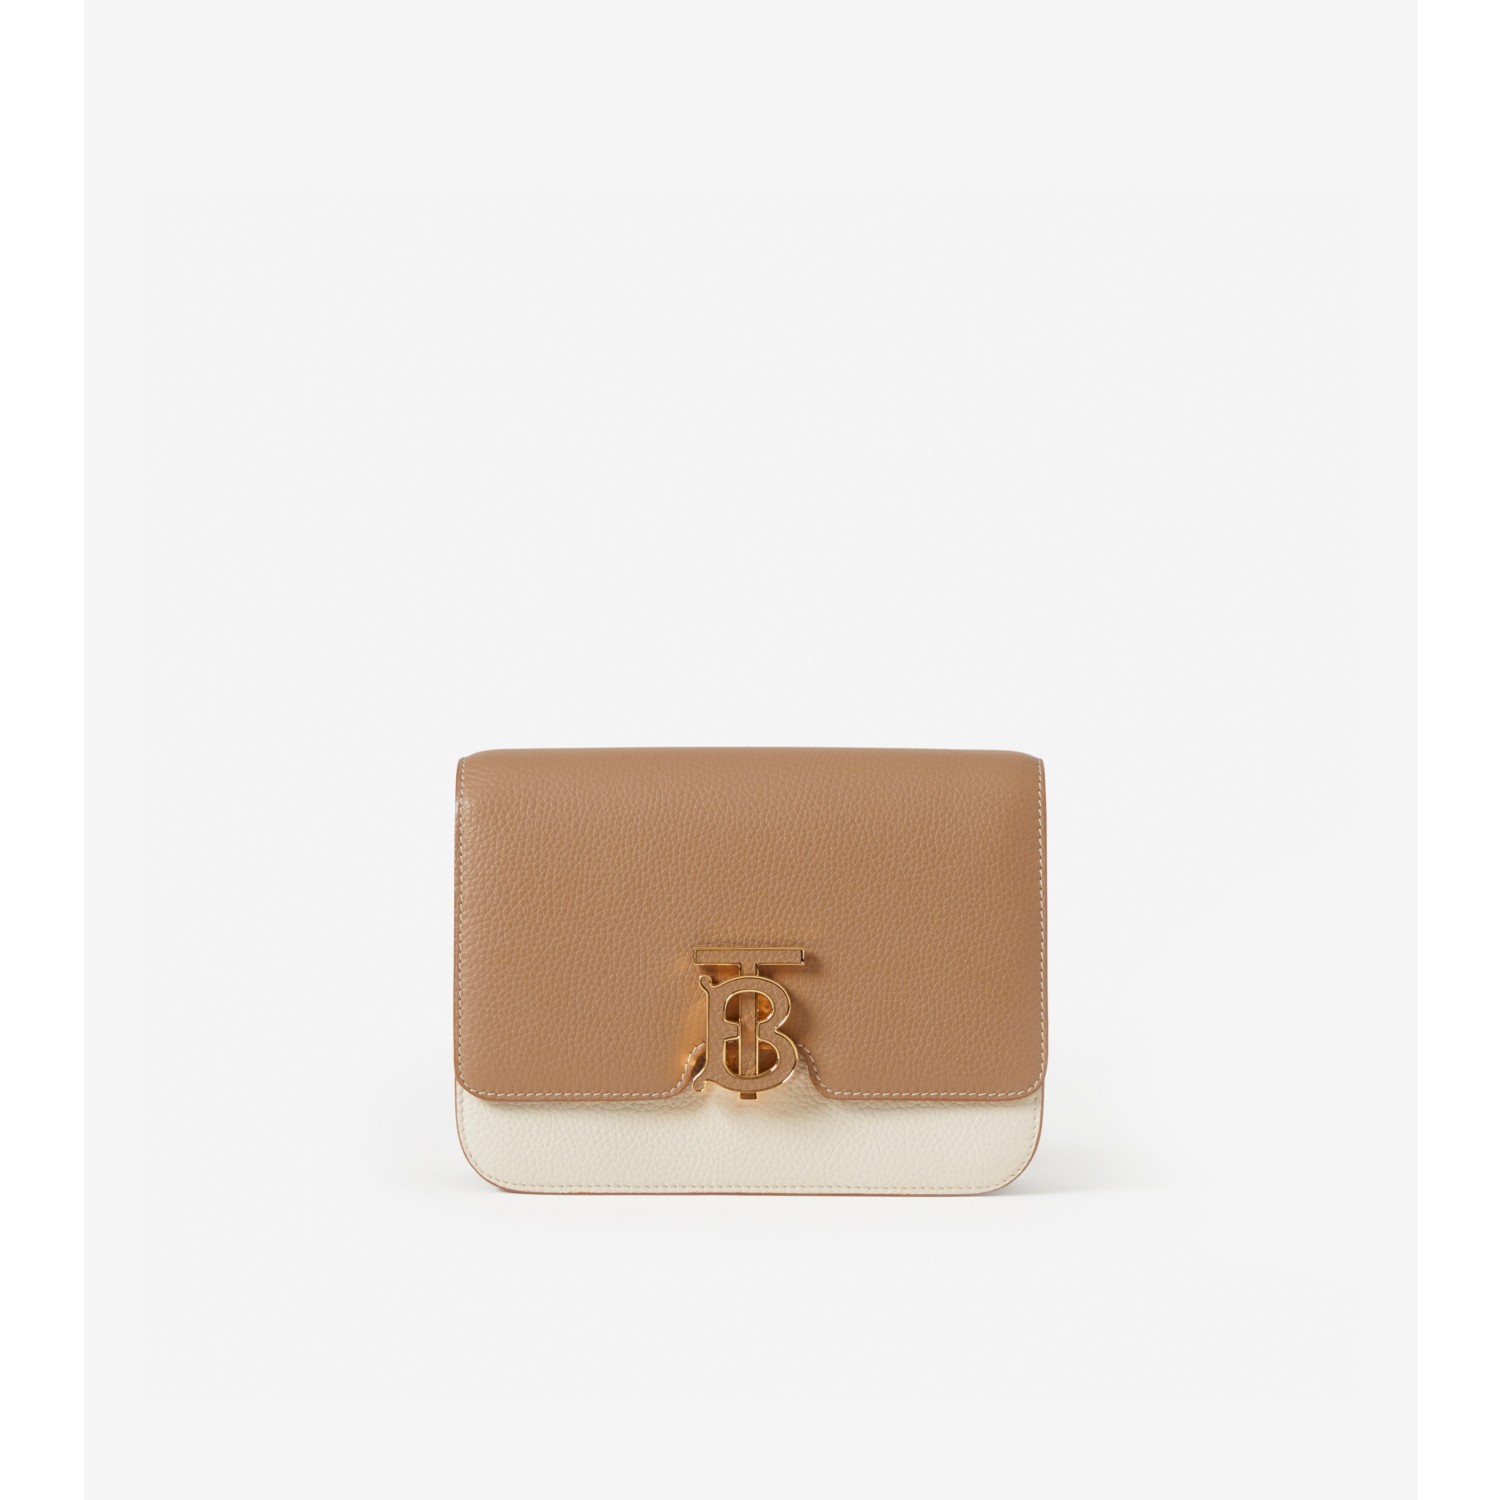 Burberry Grainy Leather TB Compact Wallet